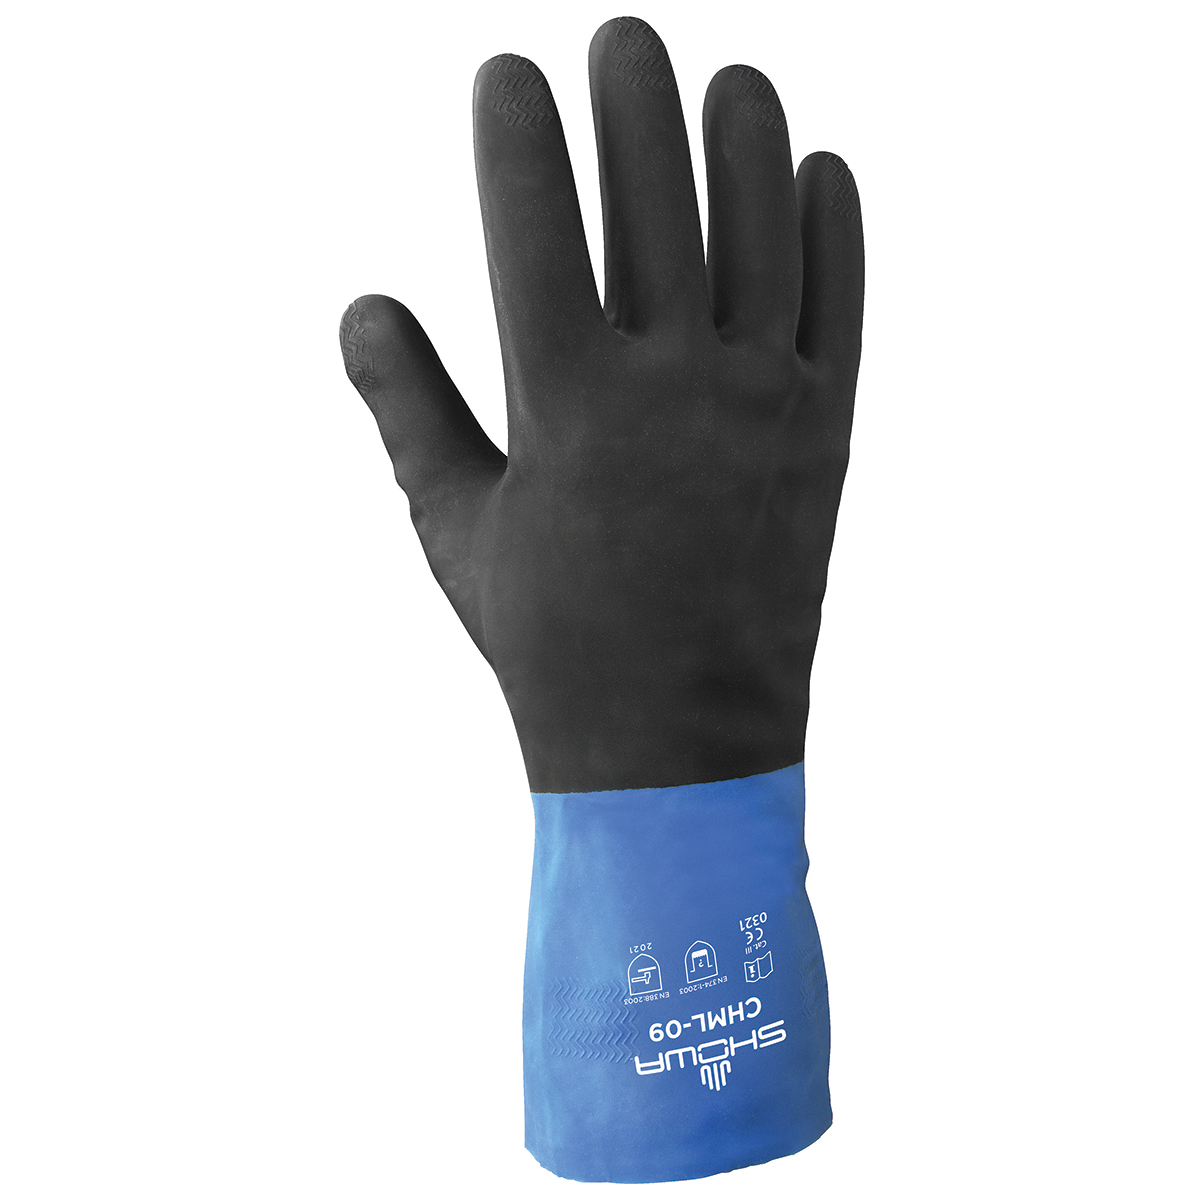 Chemical resistant, neoprene-over-natural rubber latex, unsupported, 12", 26-mil, flock lined, black over blue safety feature, extra large